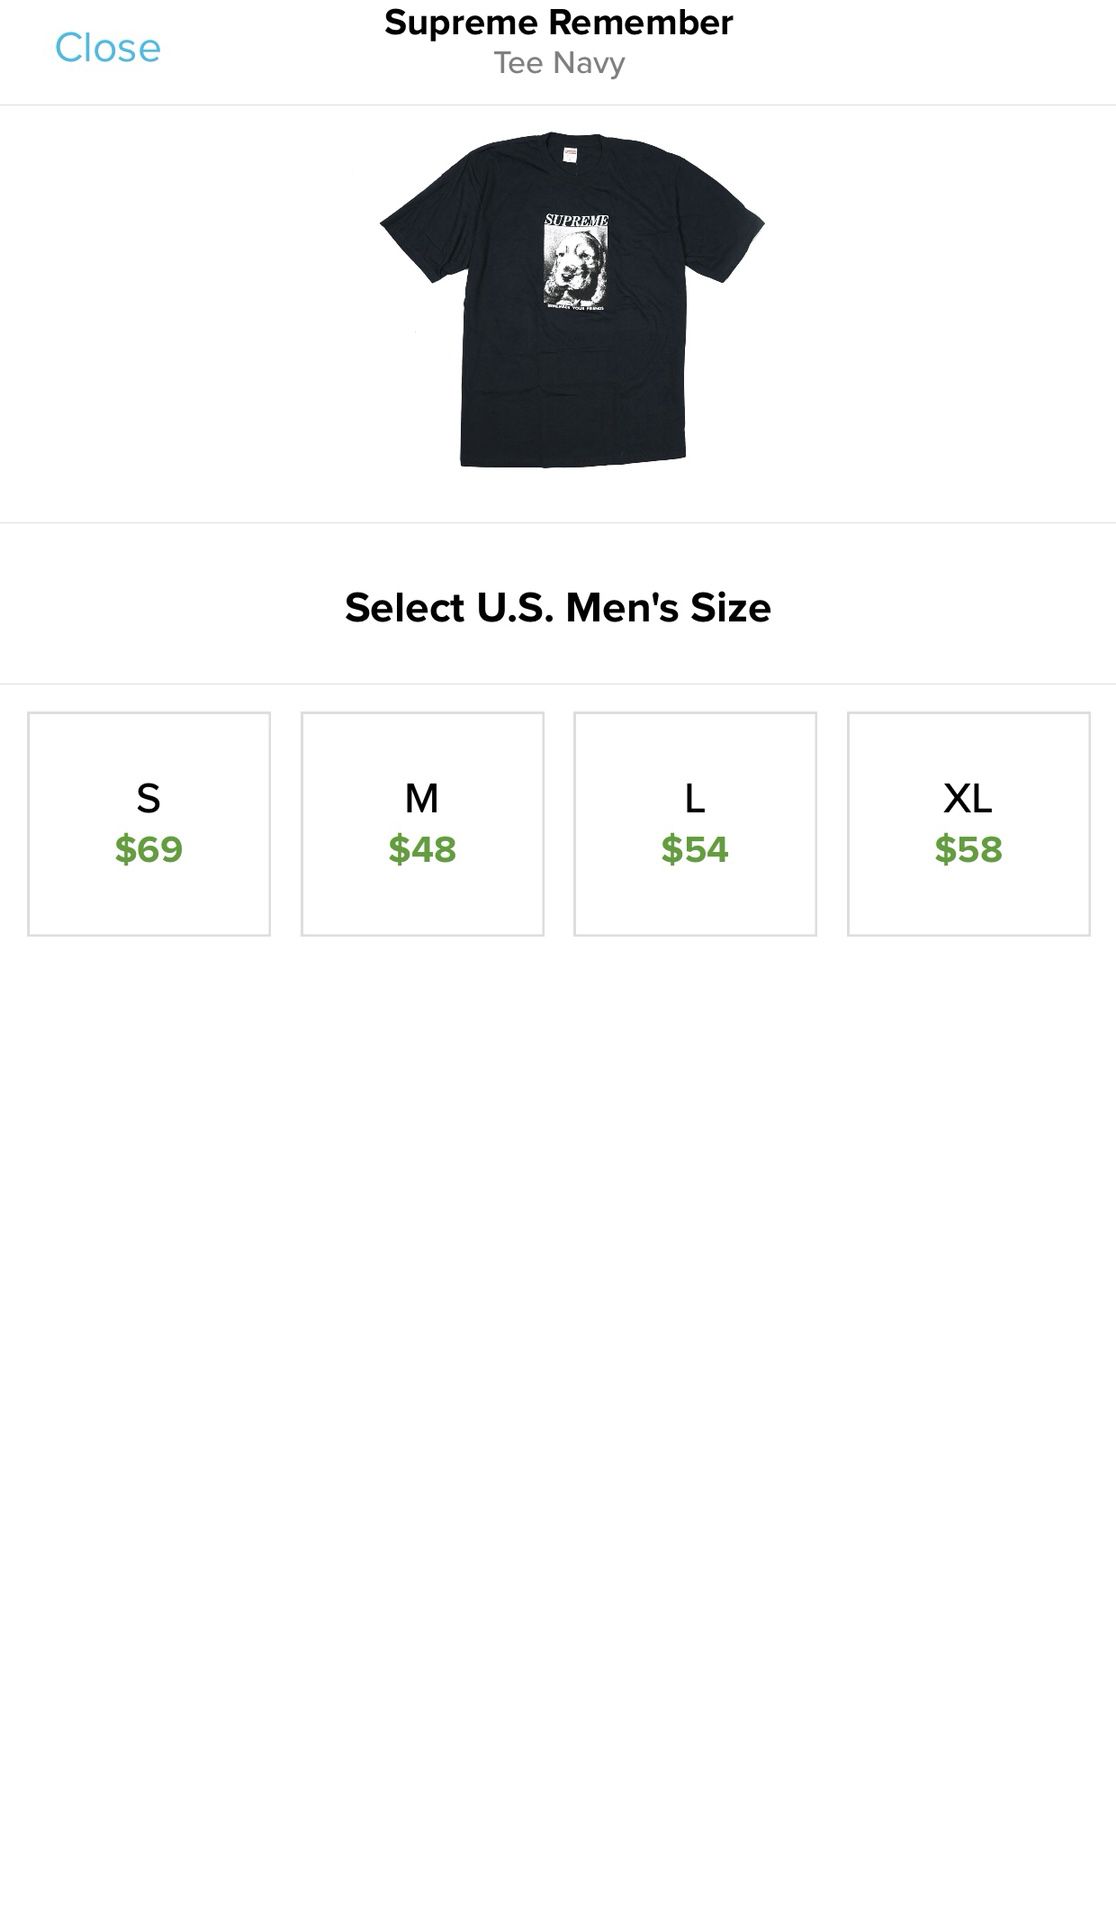 Supreme remember your friends tee for Sale in Boynton Beach, FL   OfferUp